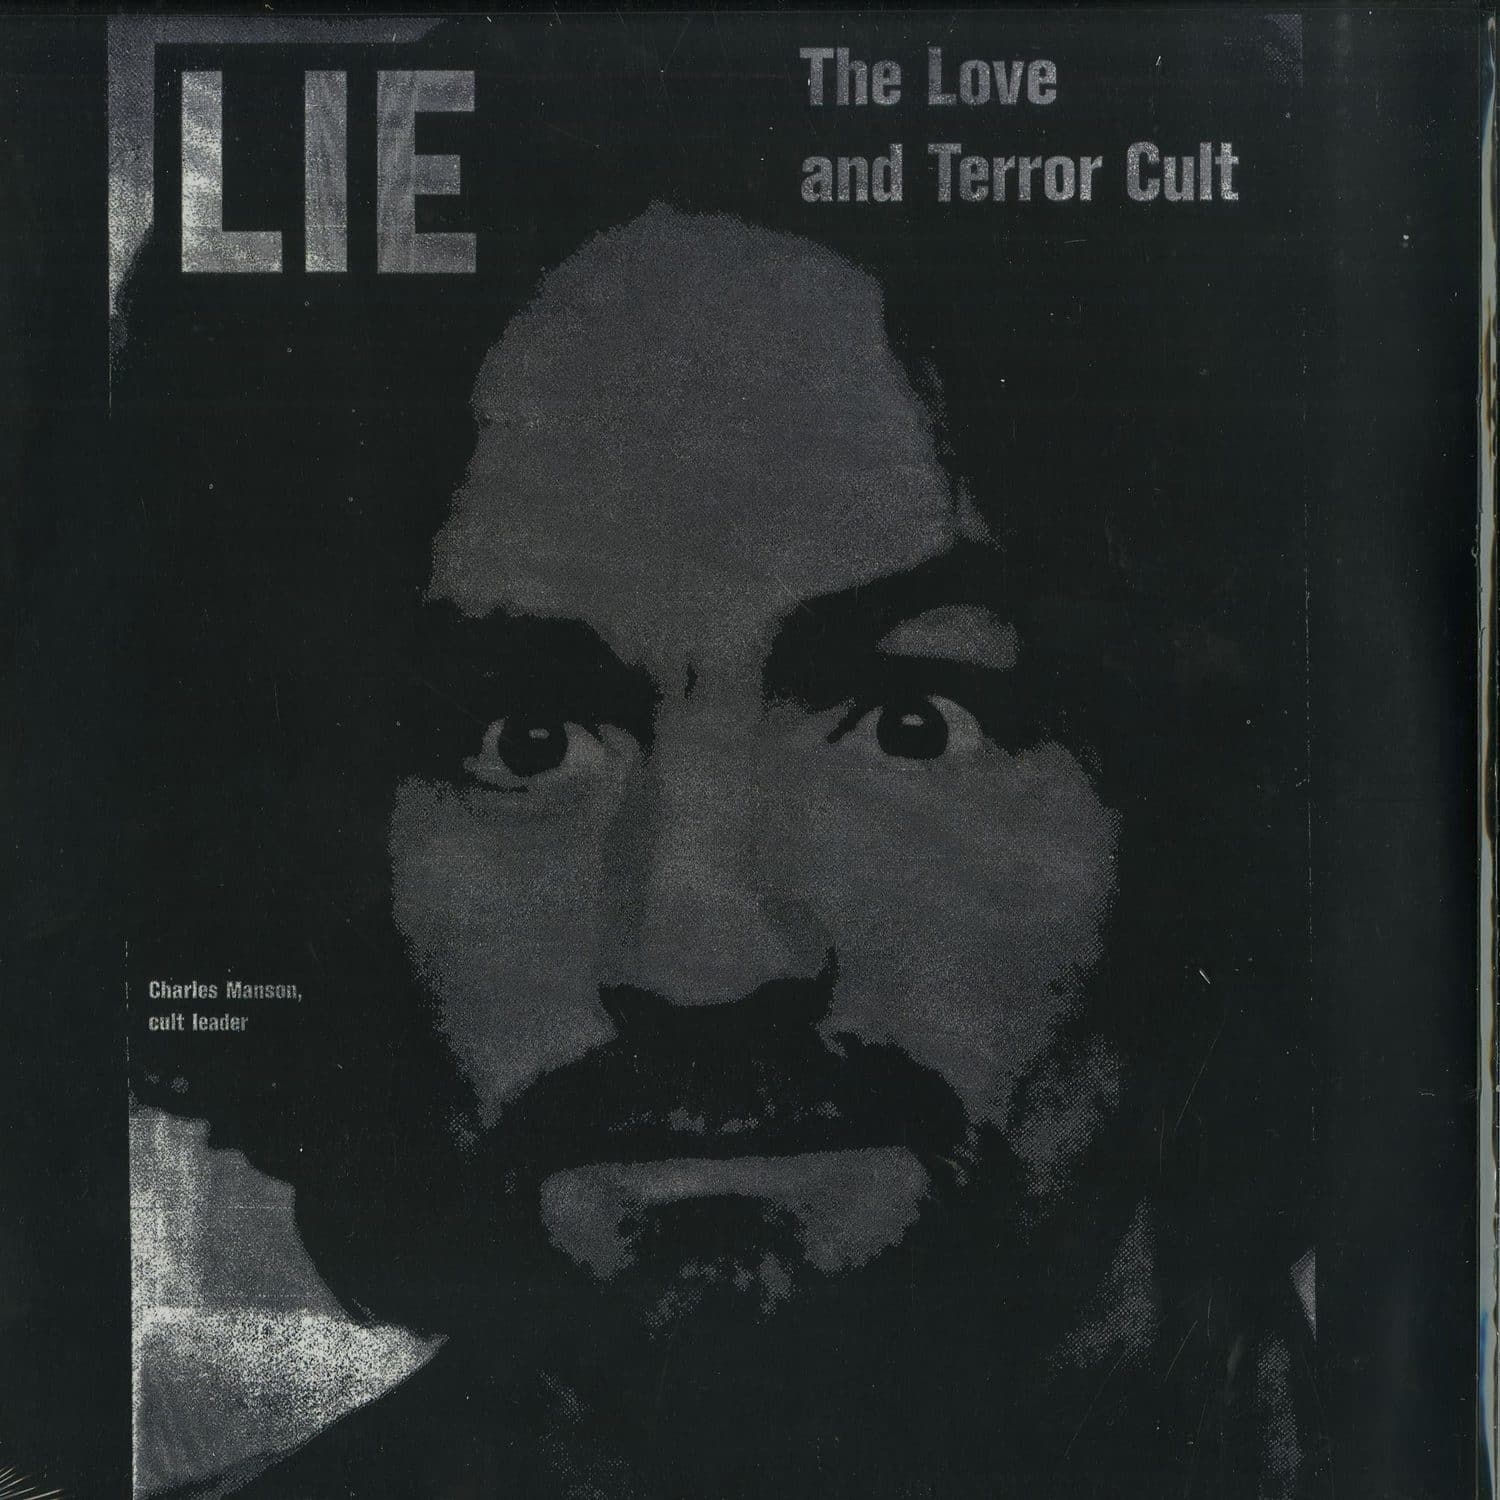 Charles Manson - LIE - THE LOVE AND TERROR CULT 